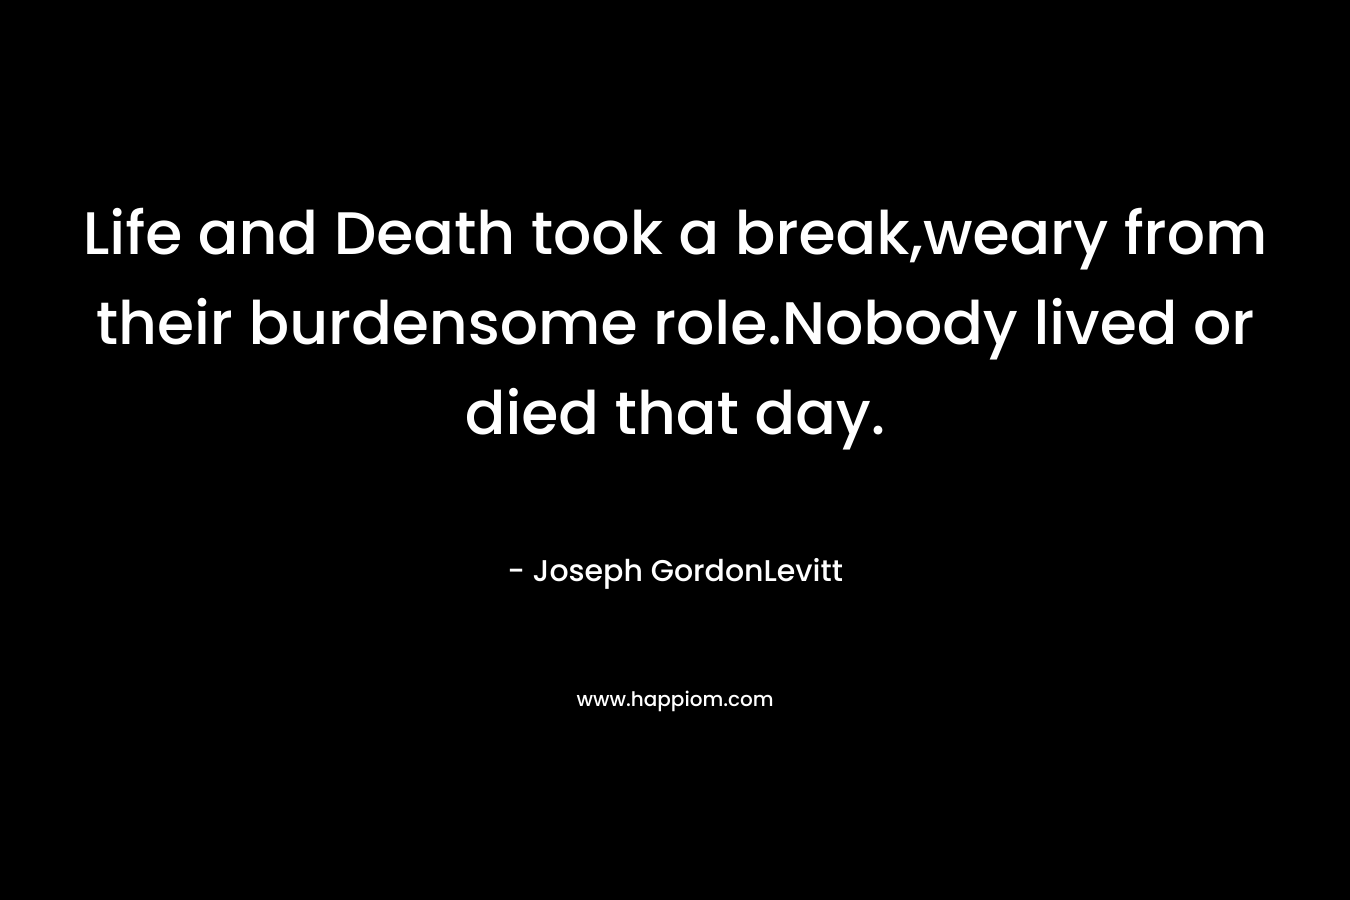 Life and Death took a break,weary from their burdensome role.Nobody lived or died that day.